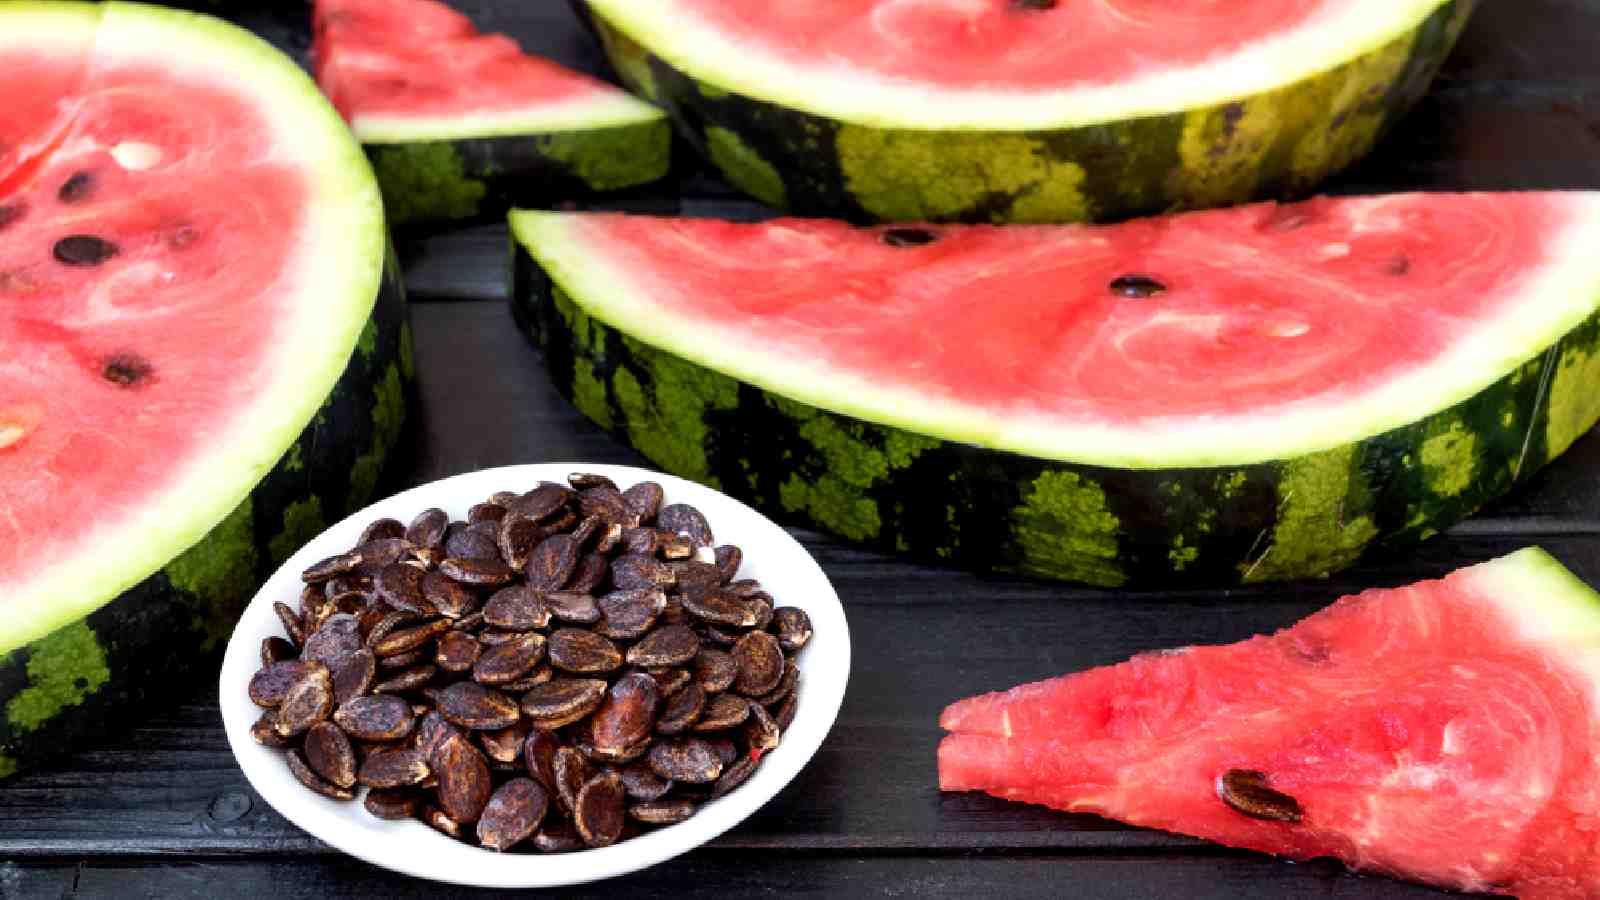 What Are The Benefits Of Eating Watermelon Seeds